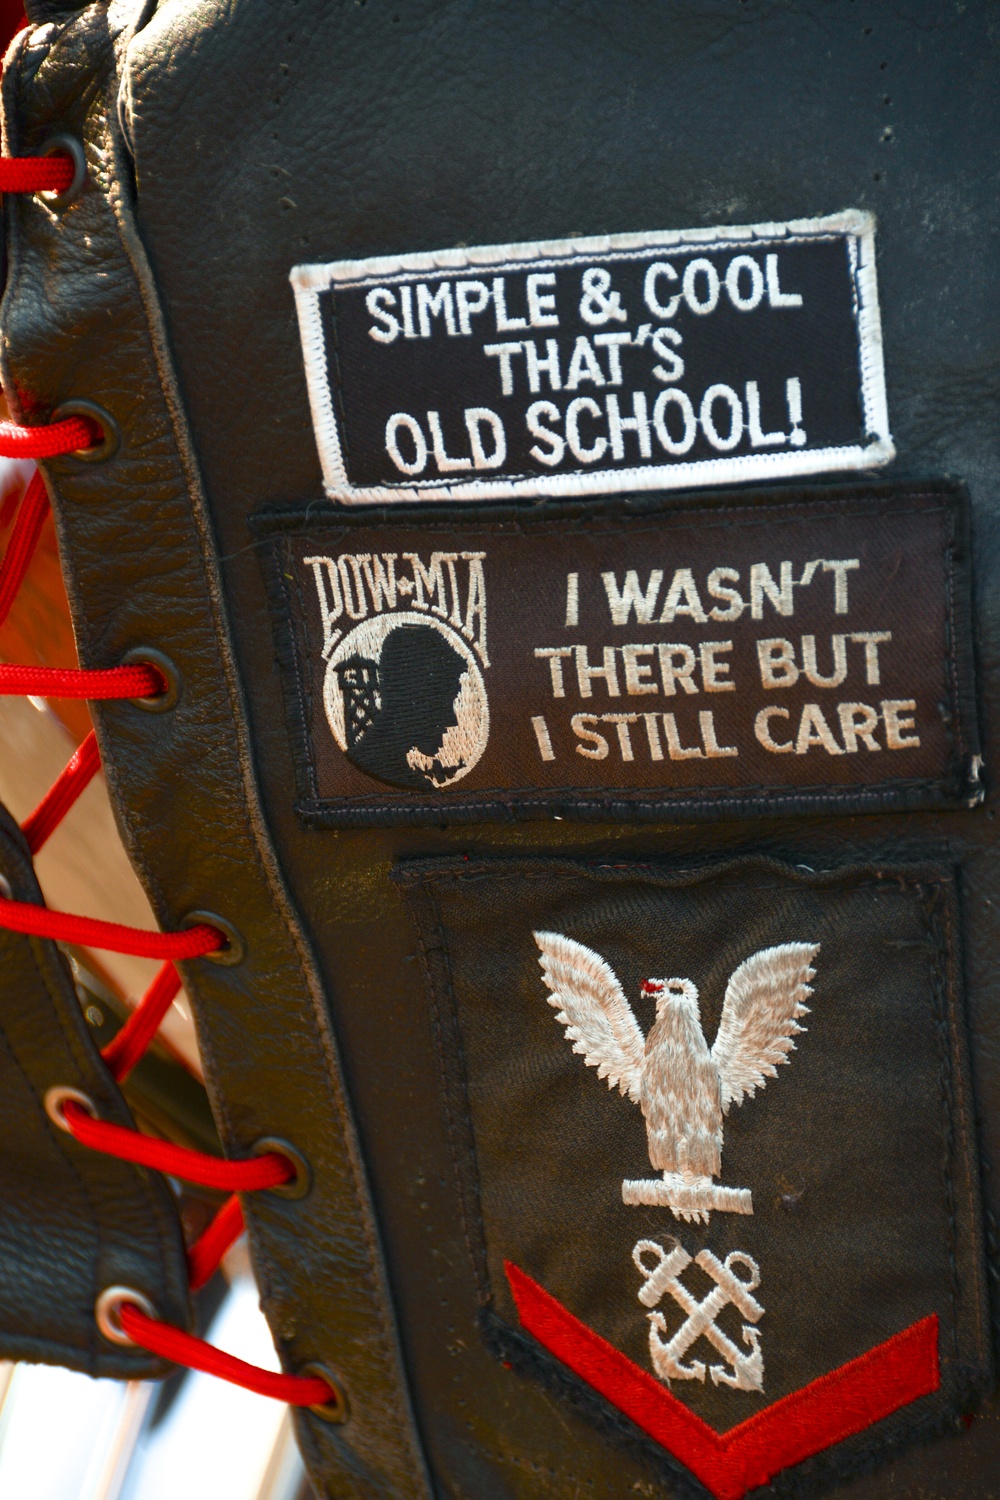 Patches, including one showing his Navy rating badge and rank, adorn the motorcycle vest of Fire Department Battalion Chief John 'Johnny Mac' McDonald